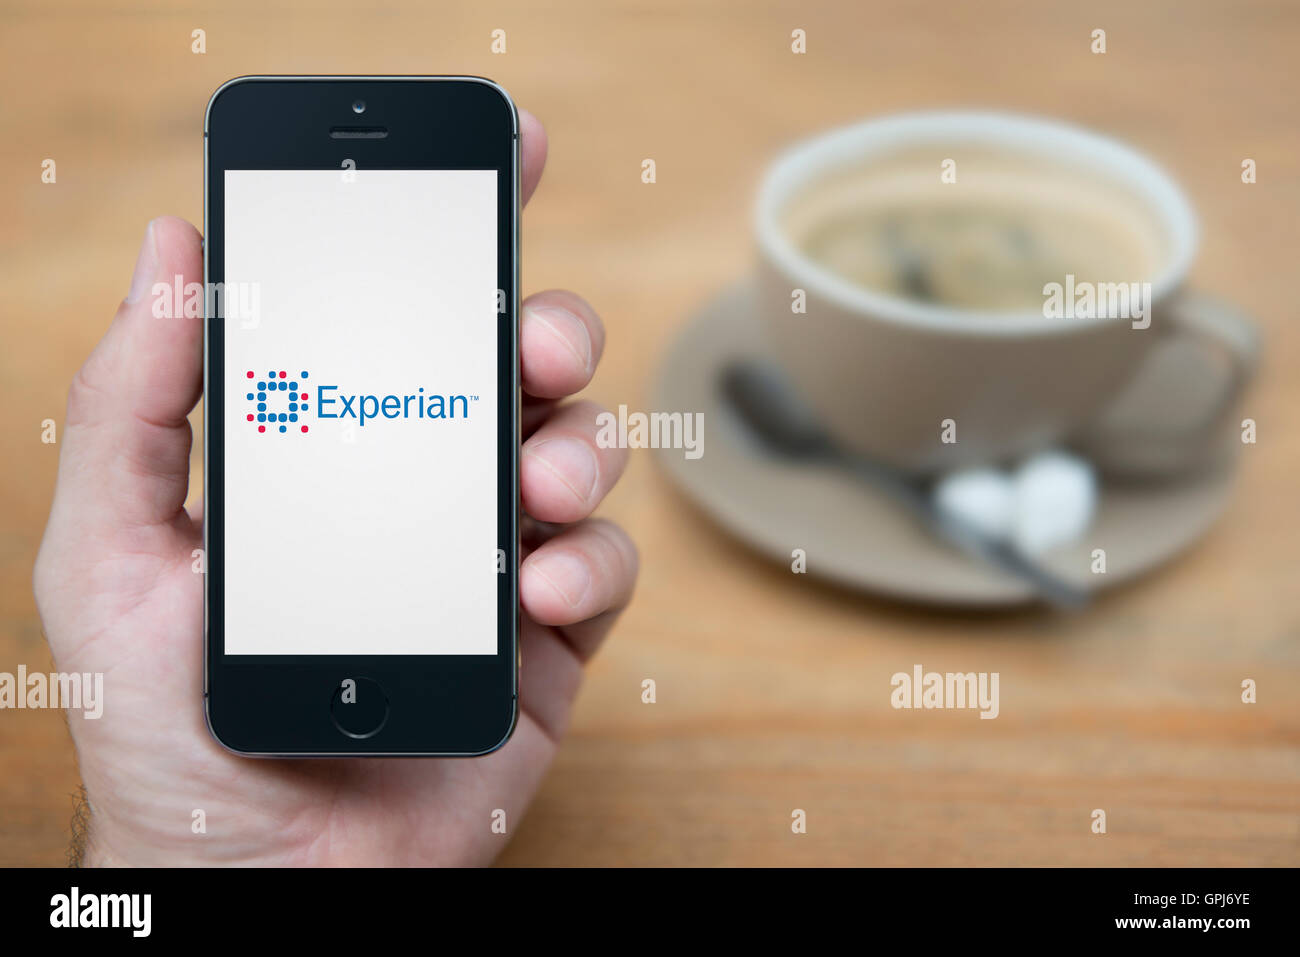 A man looks at his iPhone which displays the Experian logo, while sat with a cup of coffee (Editorial use only). Stock Photo